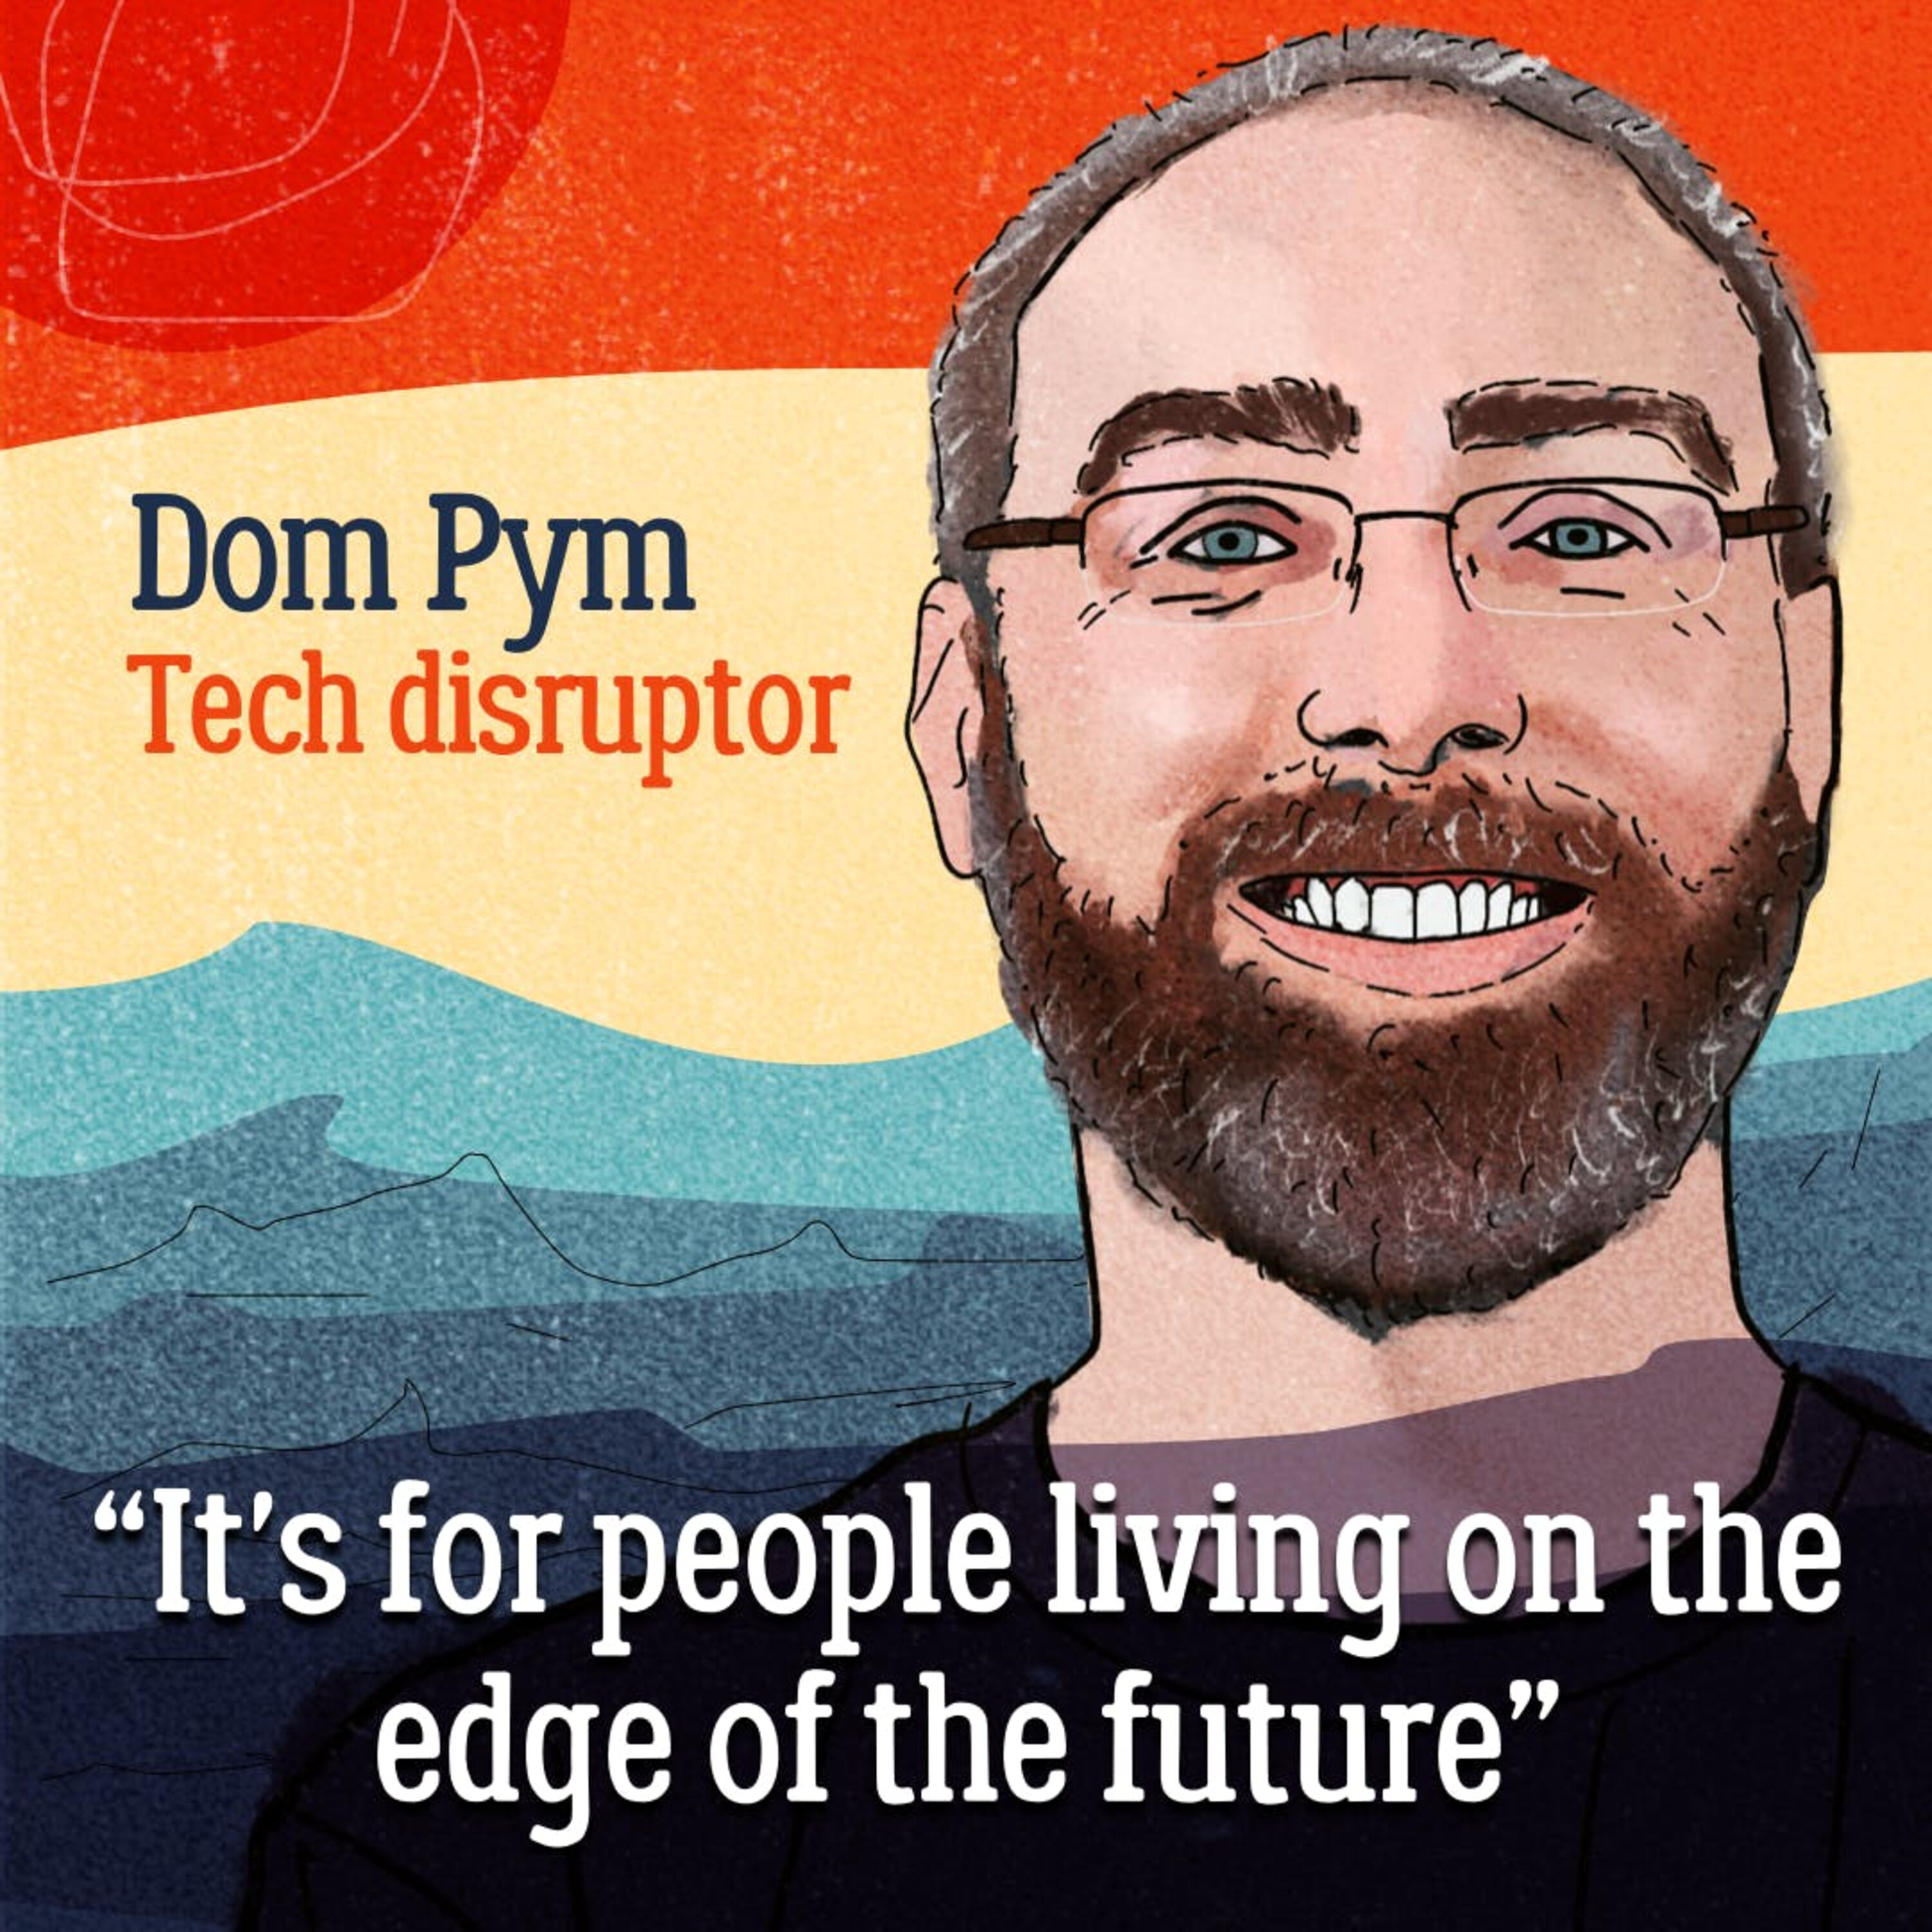 Tech titan — Dom Pym’s near-death experiences in life and business